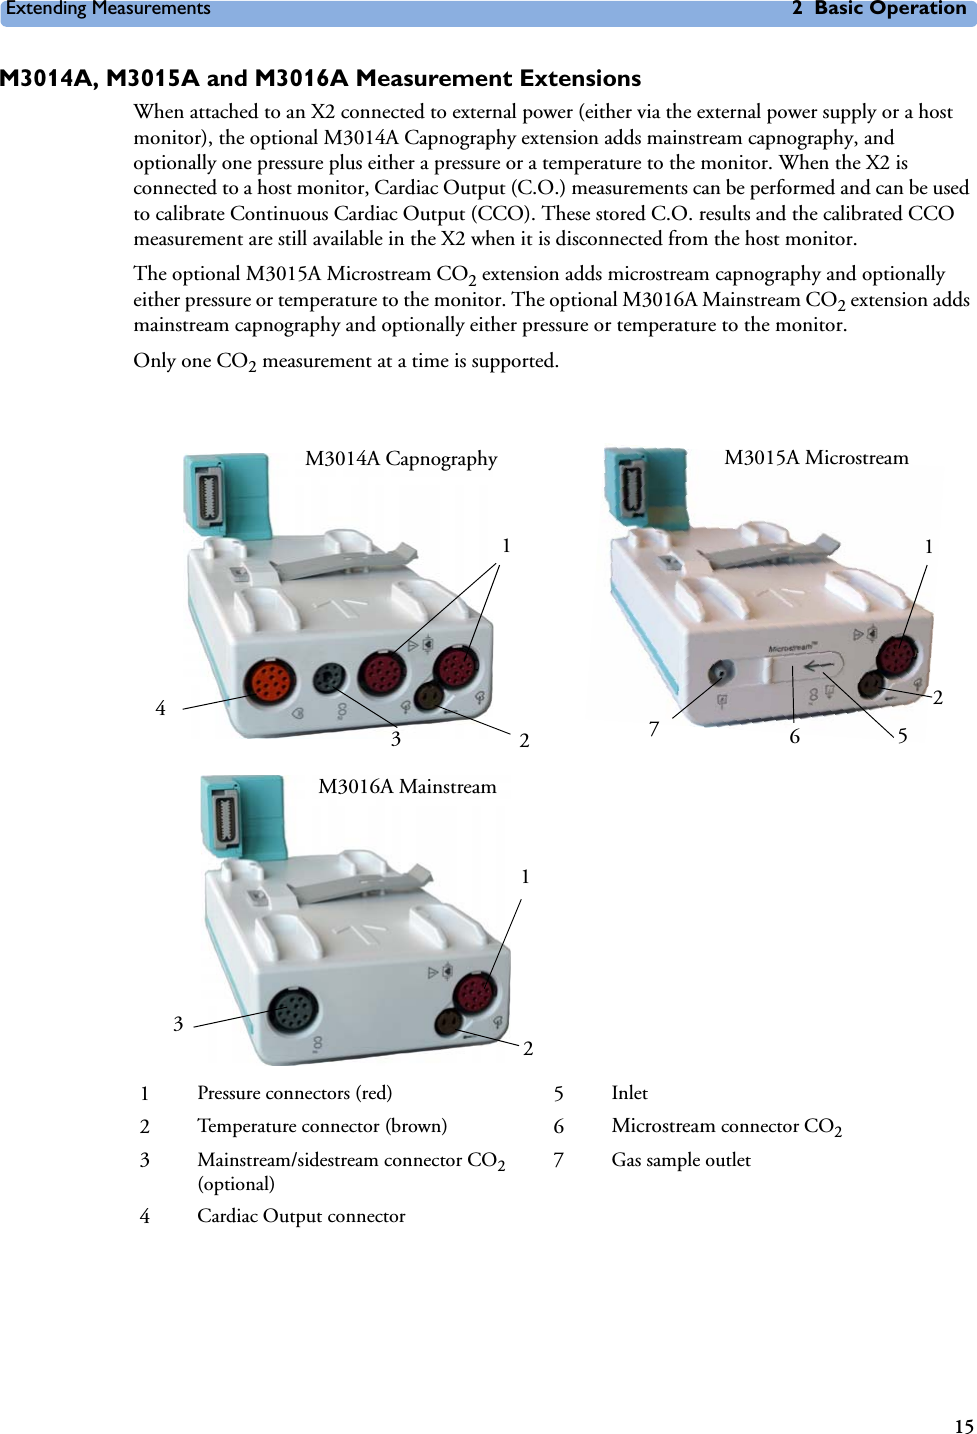 Extending Measurements 2 Basic Operation15M3014A, M3015A and M3016A Measurement ExtensionsWhen attached to an X2 connected to external power (either via the external power supply or a host monitor), the optional M3014A Capnography extension adds mainstream capnography, and optionally one pressure plus either a pressure or a temperature to the monitor. When the X2 is connected to a host monitor, Cardiac Output (C.O.) measurements can be performed and can be used to calibrate Continuous Cardiac Output (CCO). These stored C.O. results and the calibrated CCO measurement are still available in the X2 when it is disconnected from the host monitor.The optional M3015A Microstream CO2 extension adds microstream capnography and optionally either pressure or temperature to the monitor. The optional M3016A Mainstream CO2 extension adds mainstream capnography and optionally either pressure or temperature to the monitor. Only one CO2 measurement at a time is supported.1Pressure connectors (red) 5Inlet2Temperature connector (brown) 6Microstream connector CO23Mainstream/sidestream connector CO2 (optional)7Gas sample outlet4Cardiac Output connector M3014A Capnography M3015A Microstream12613275412M3016A Mainstream3